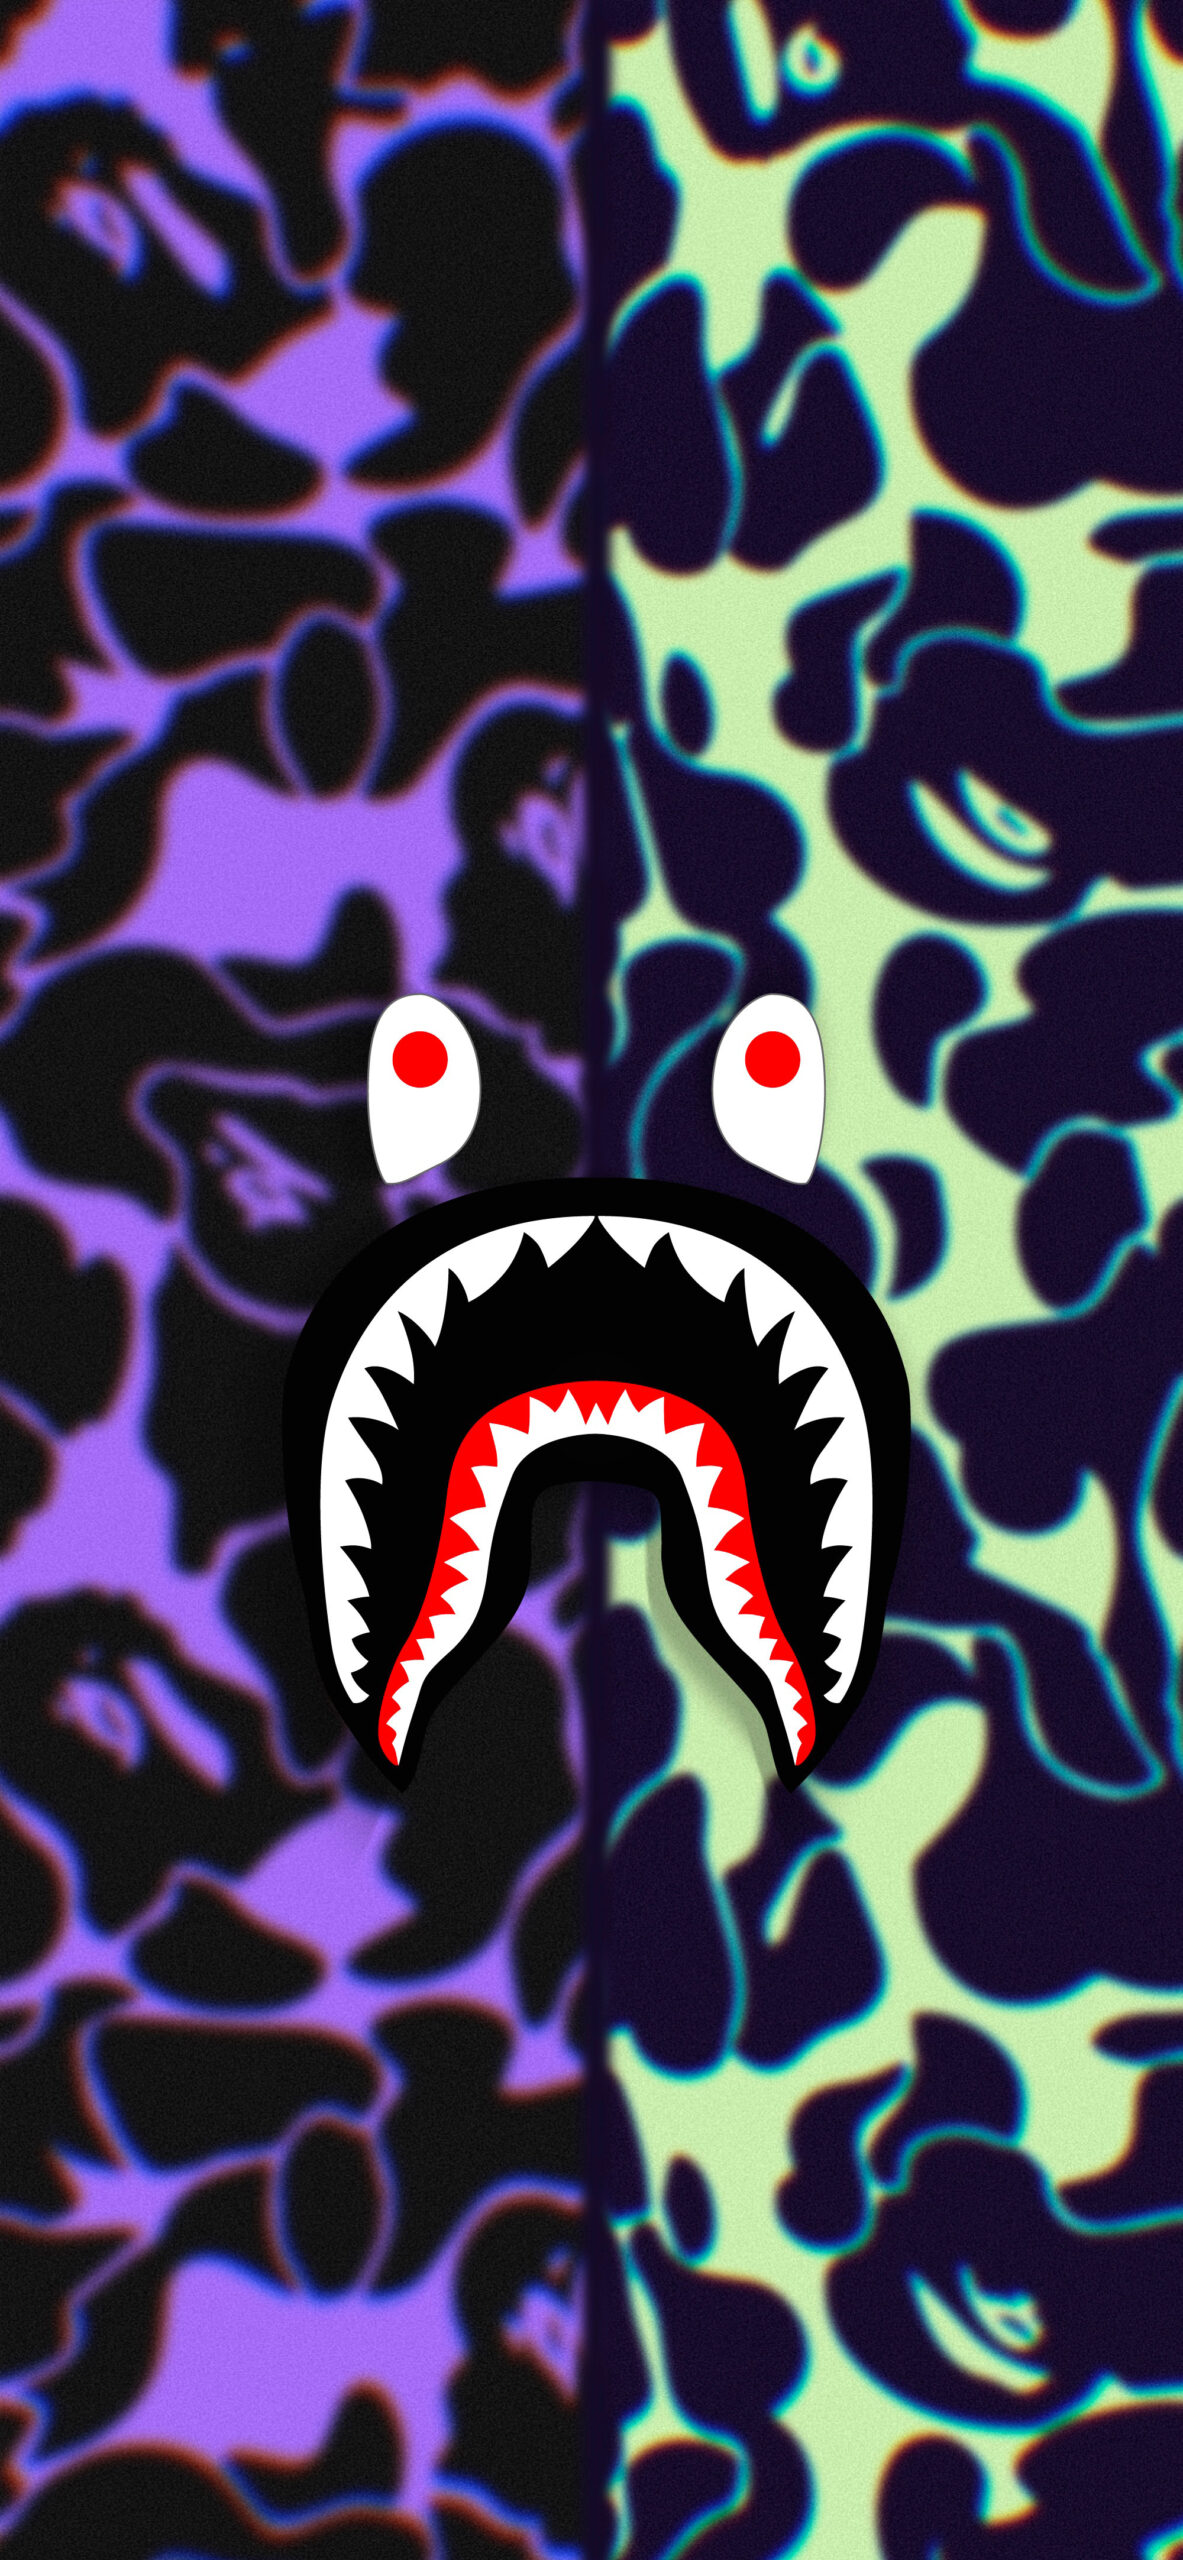 Bape Wallpaper With Shark Face On Camo Background